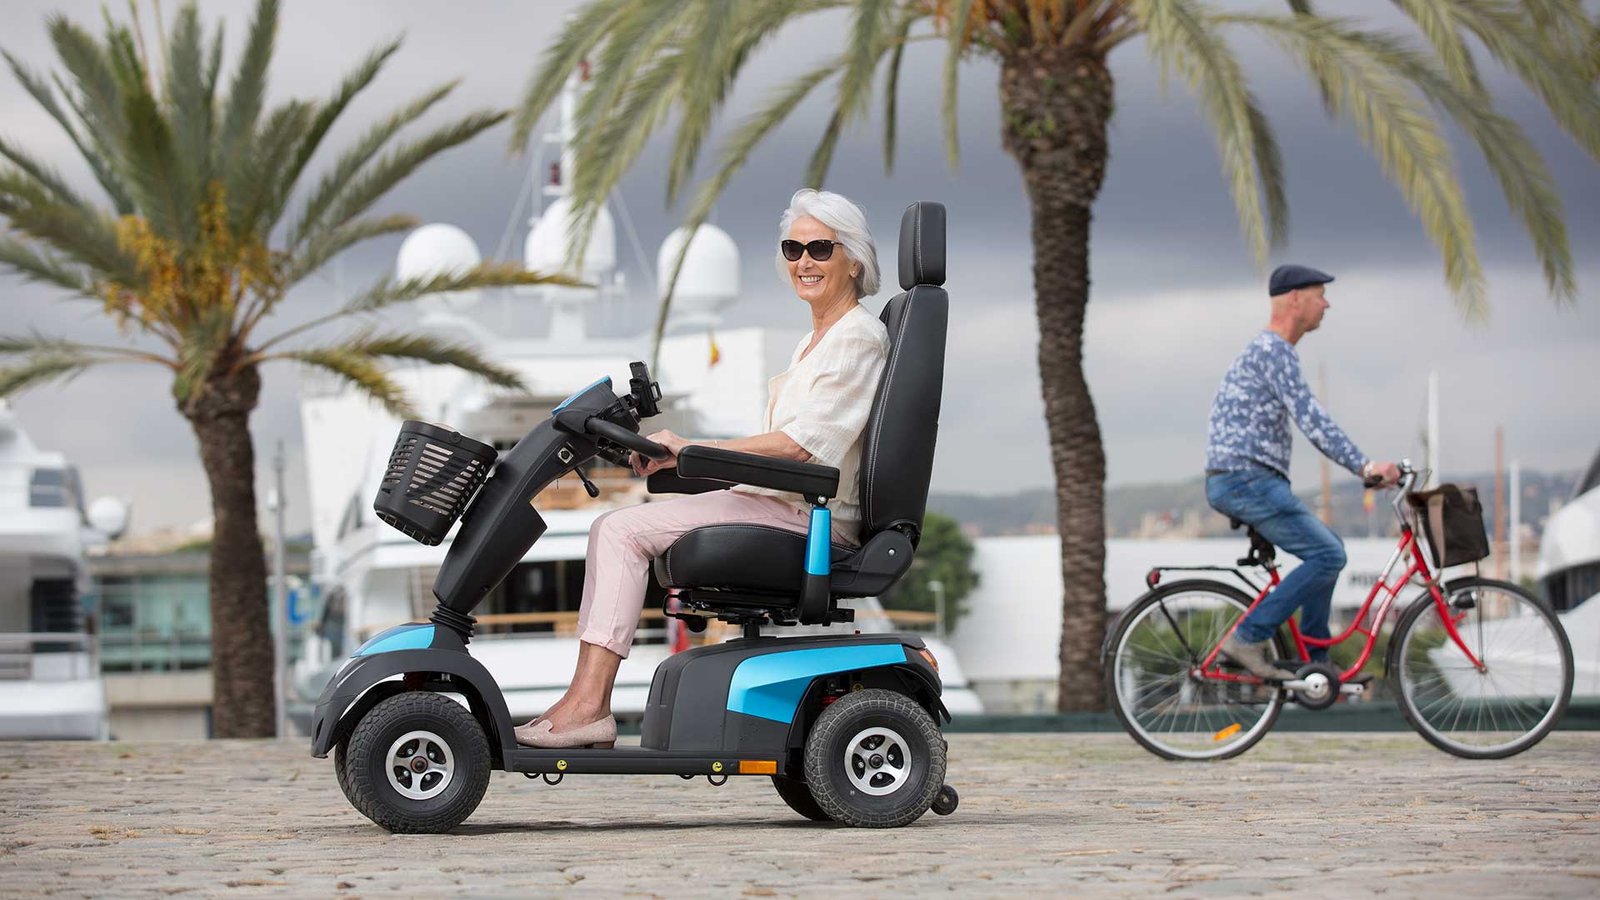 A New Backbone For The People With Mobility Impairment